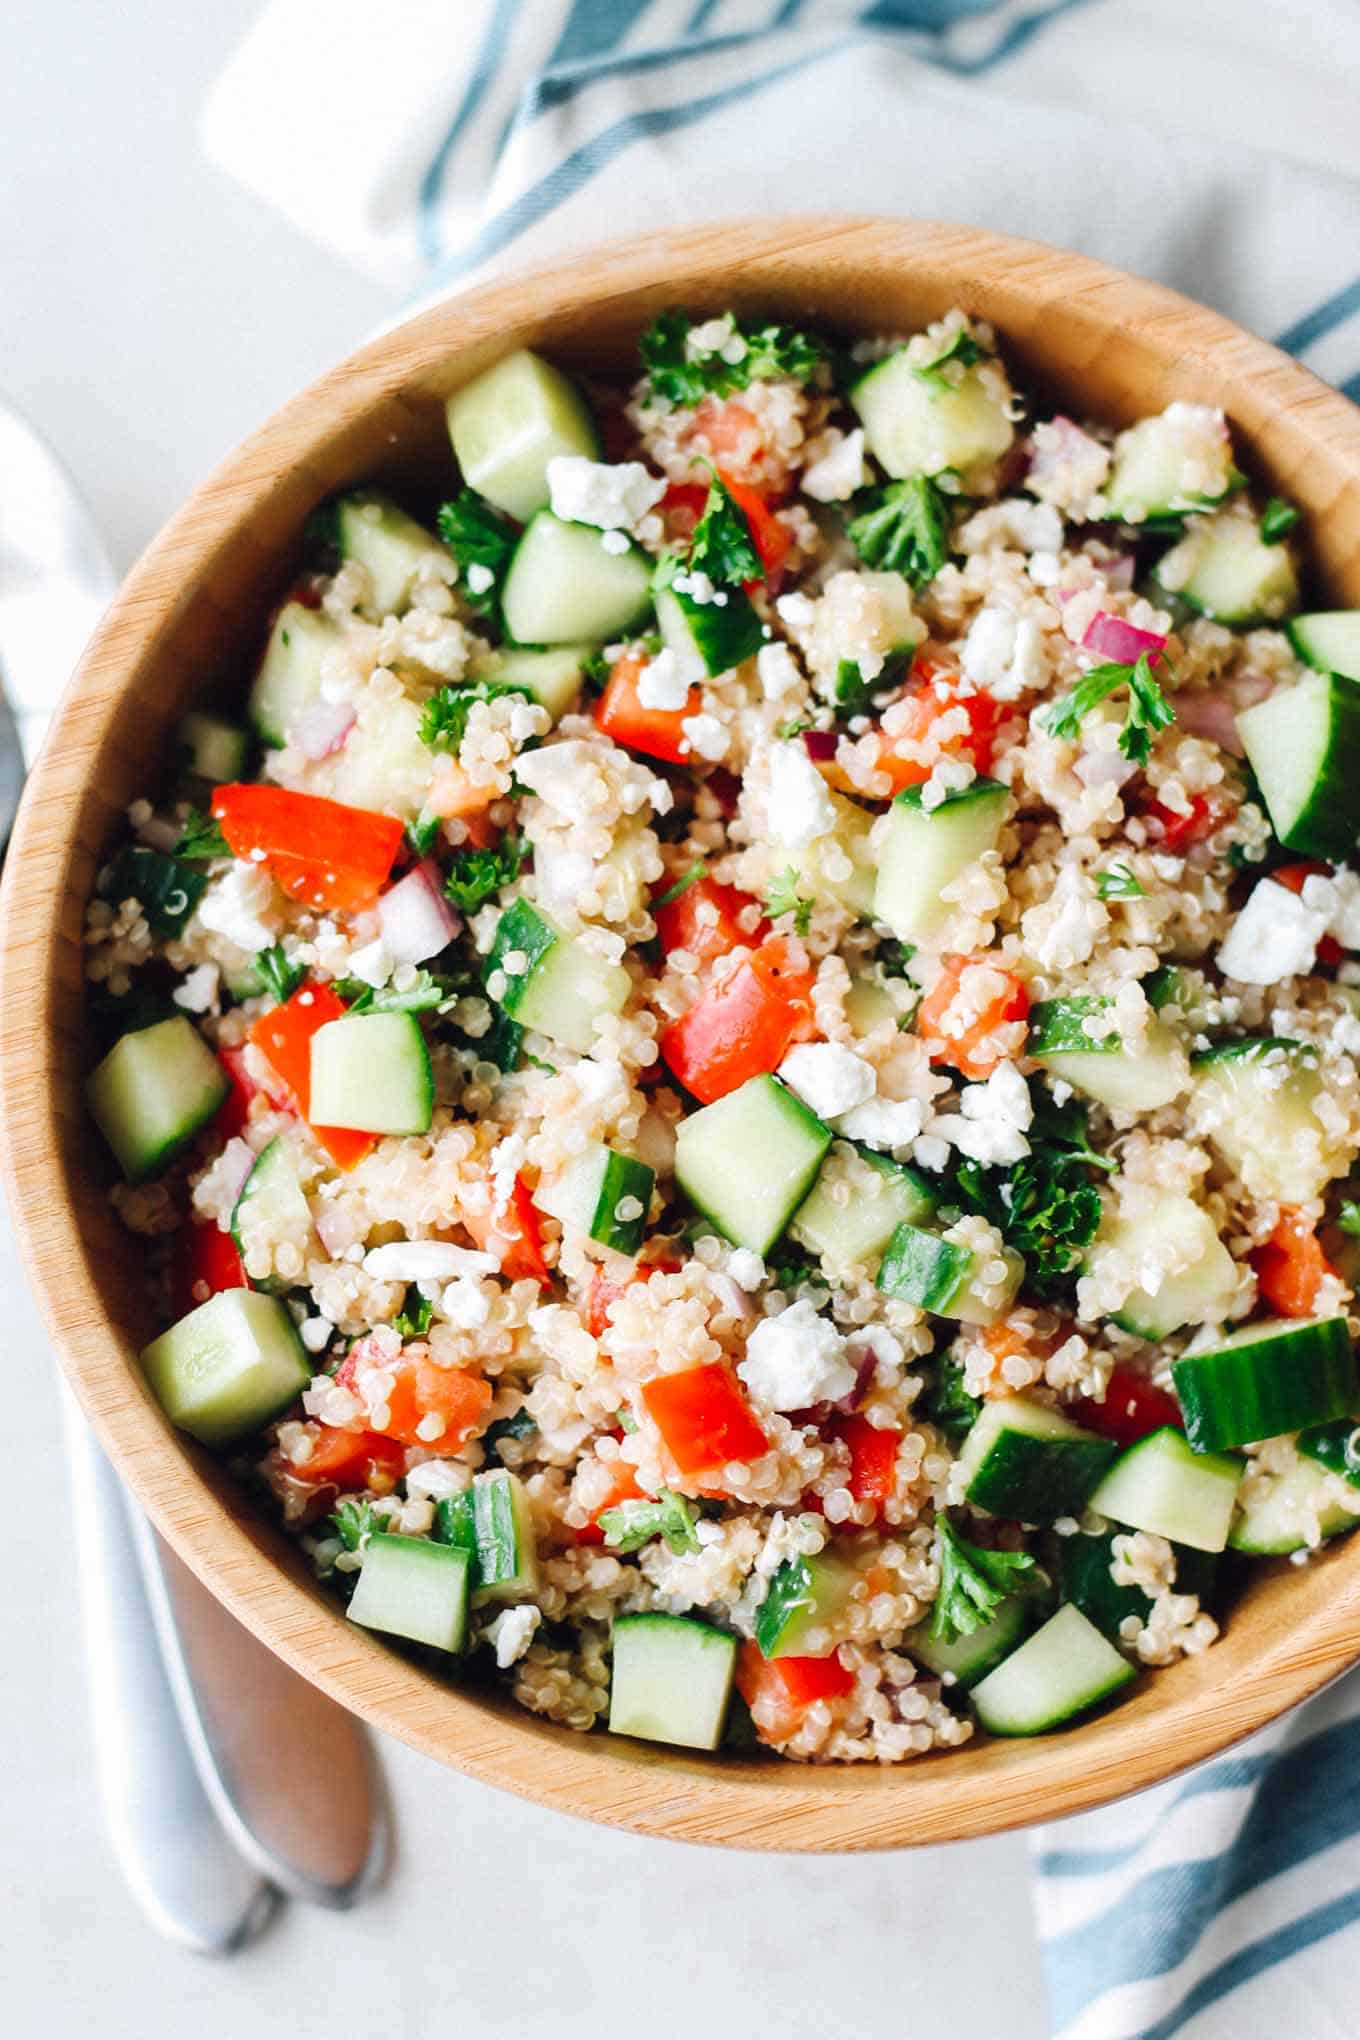 Greek Quinoa Salad in a wooden bowl with a napkin and serving utensils on the side.